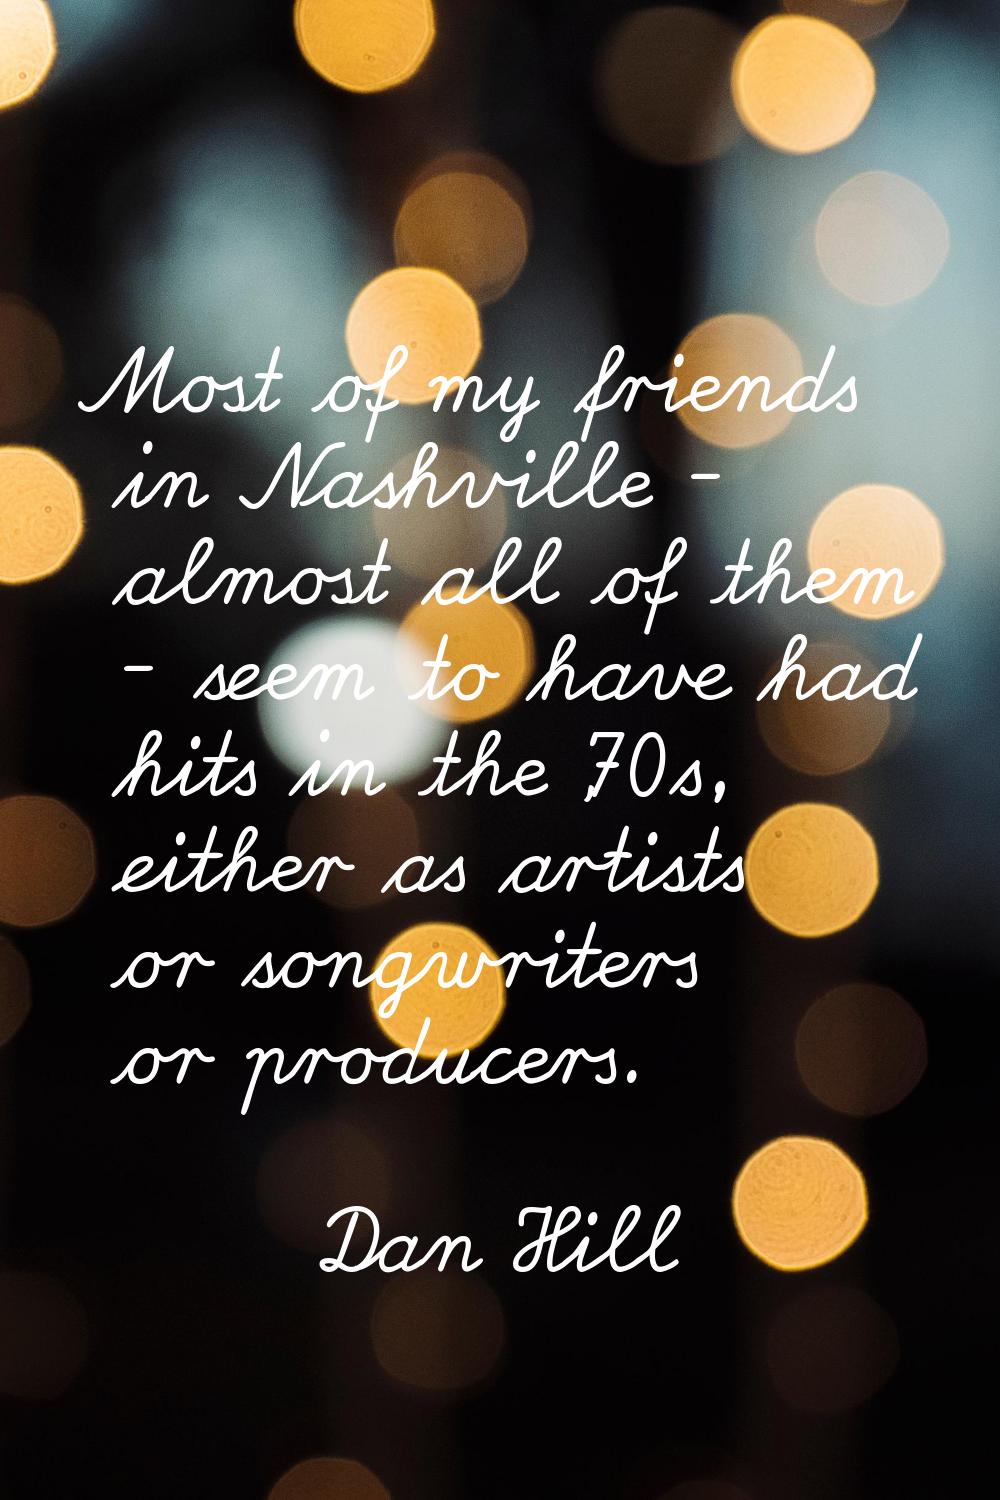 Most of my friends in Nashville - almost all of them - seem to have had hits in the '70s, either as